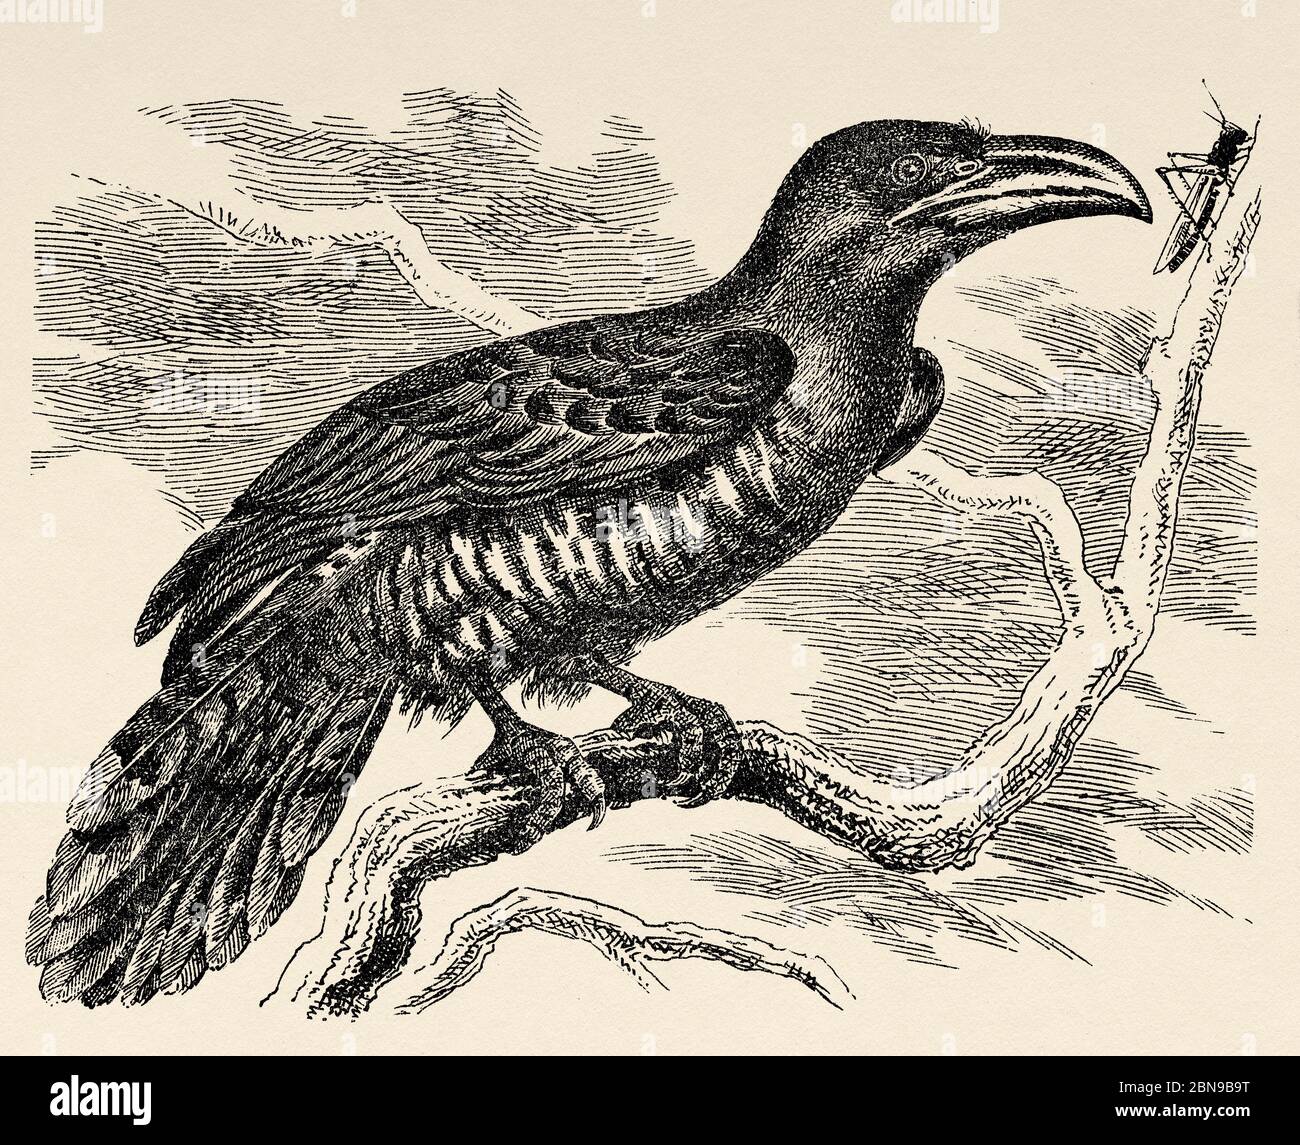 The Gould's Cuckoo (Chrysococcyx russatus) a cuculiform bird species in the Cuculidae family that lives in Southeast Asia and Australasia. Old engraved animal illustration 19th century Stock Photo